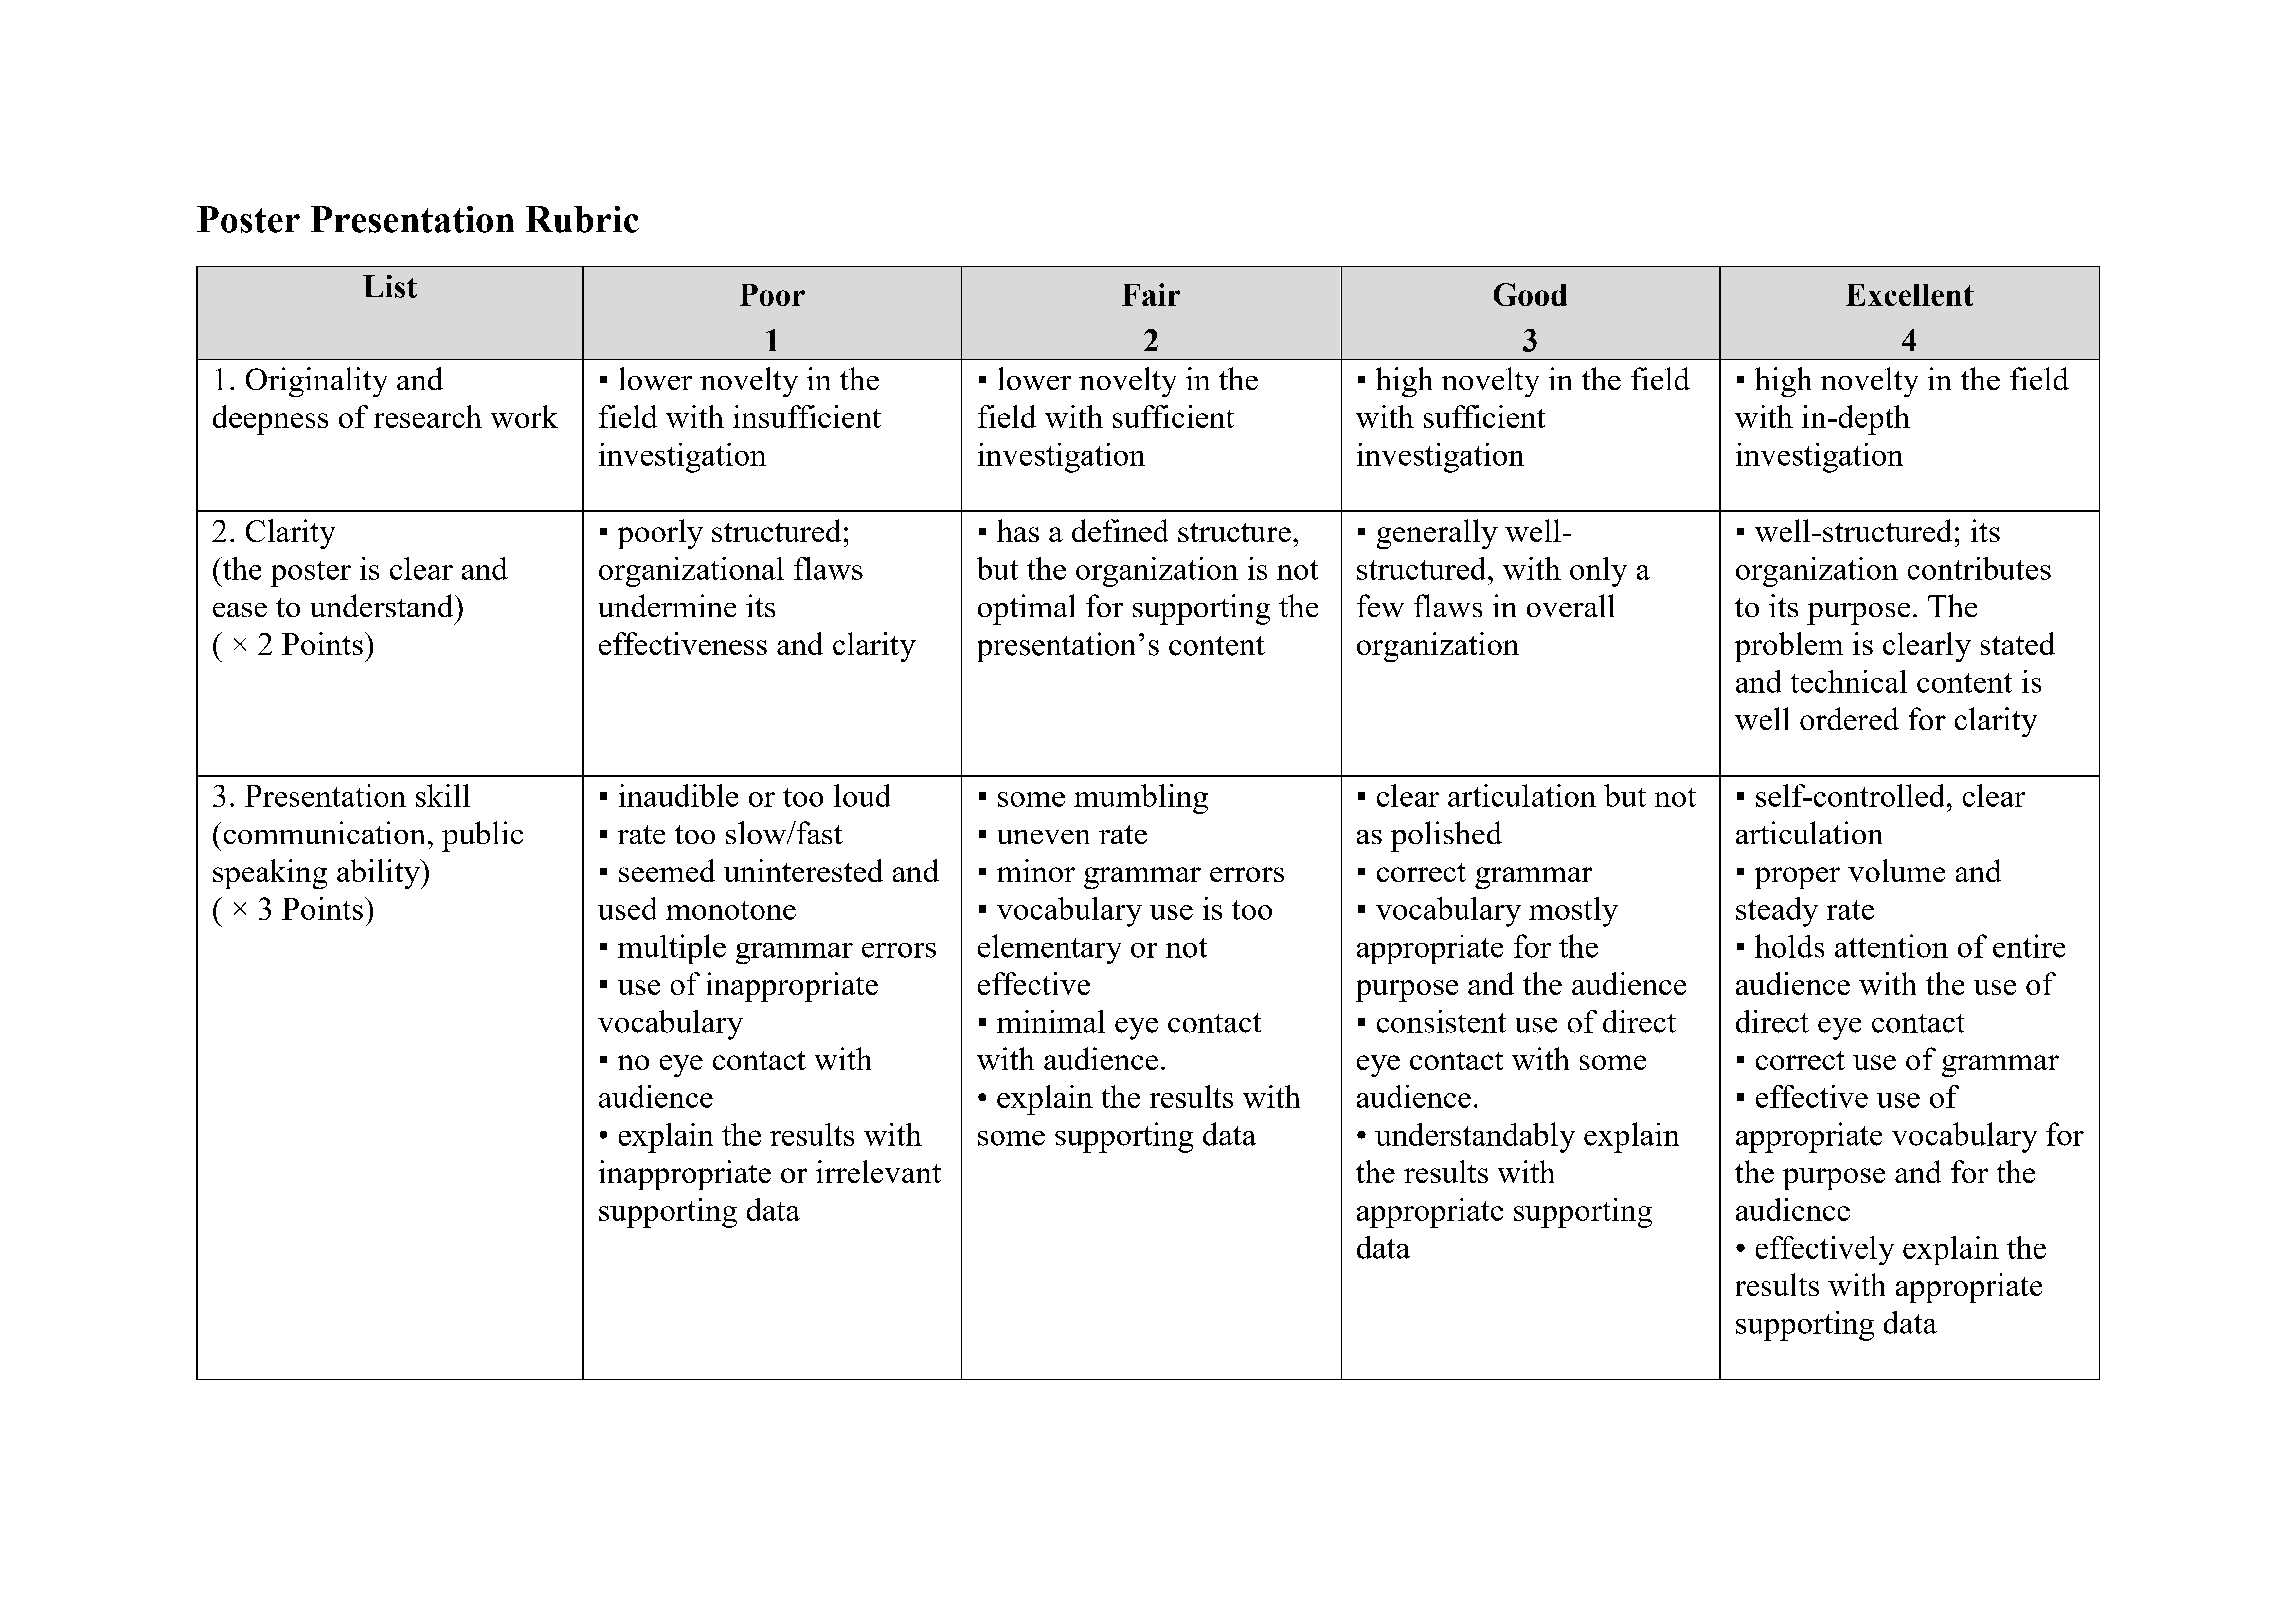 Poster presentation rubric FN Page1